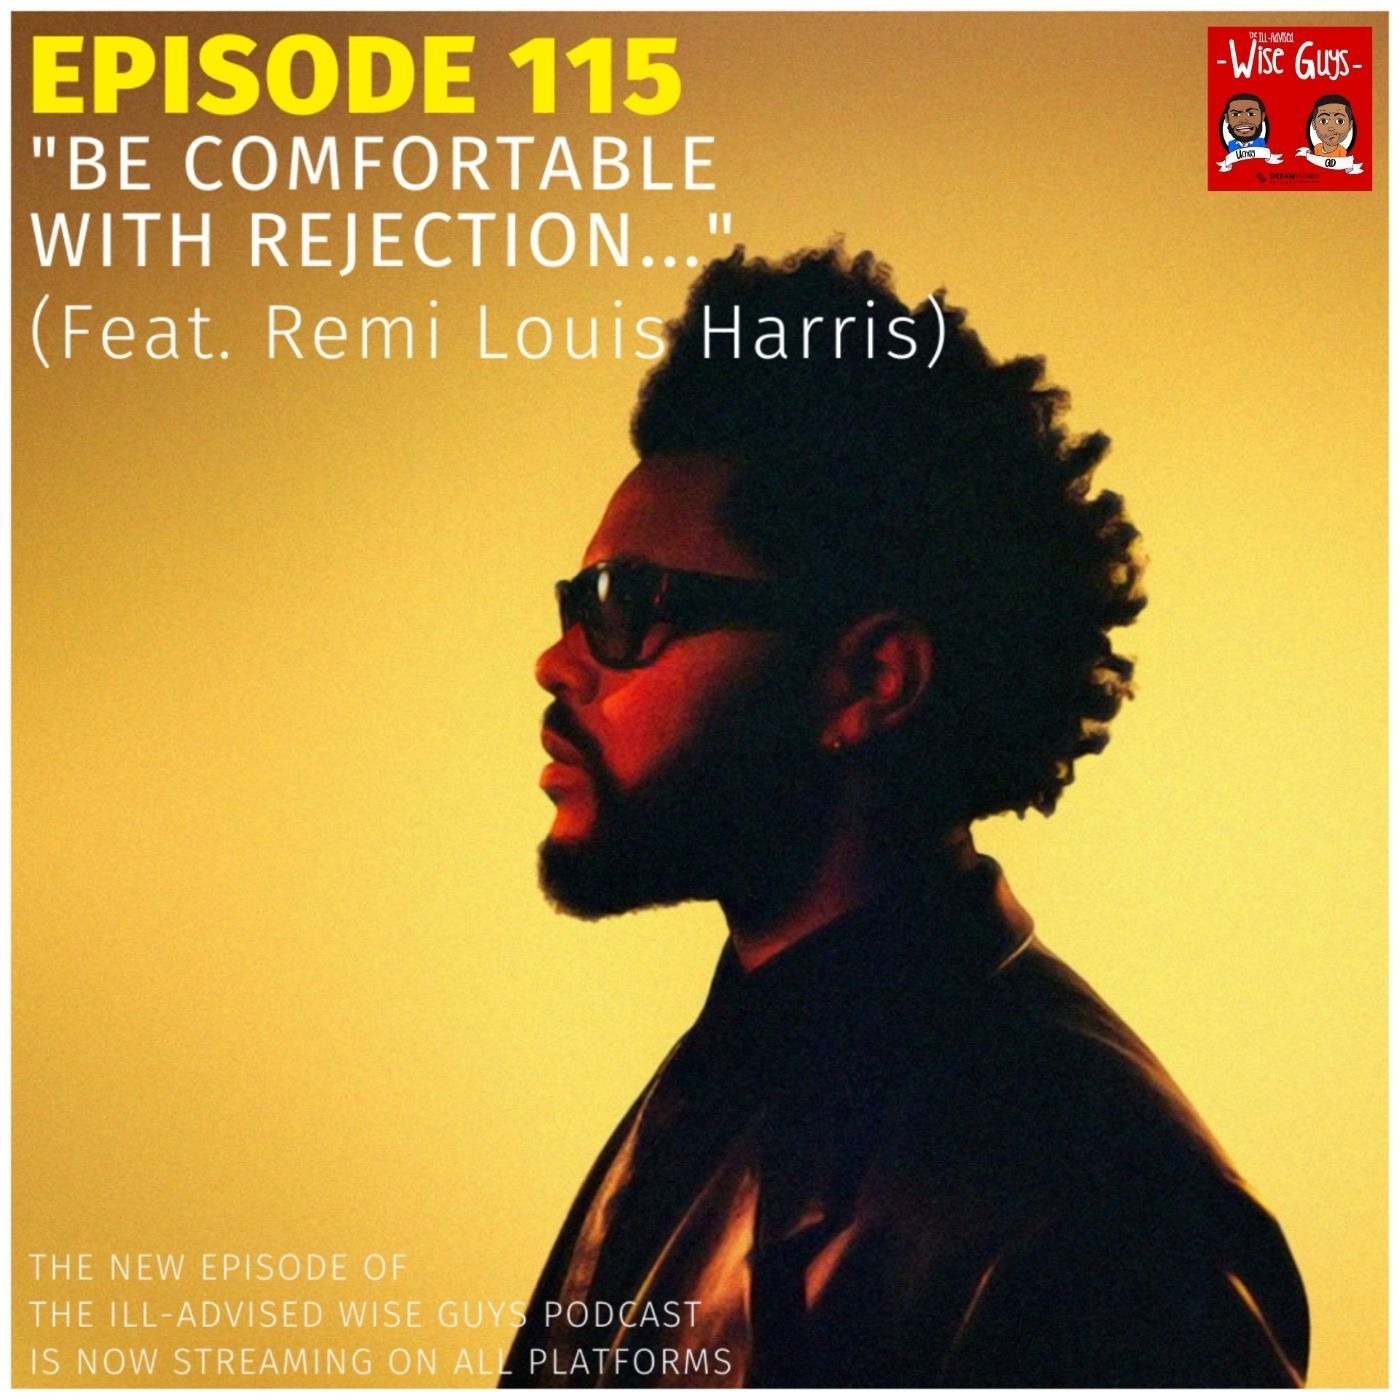 Episode 115 - "Be Comfortable With Rejection..." (Feat. Remi Louis Harris) Image